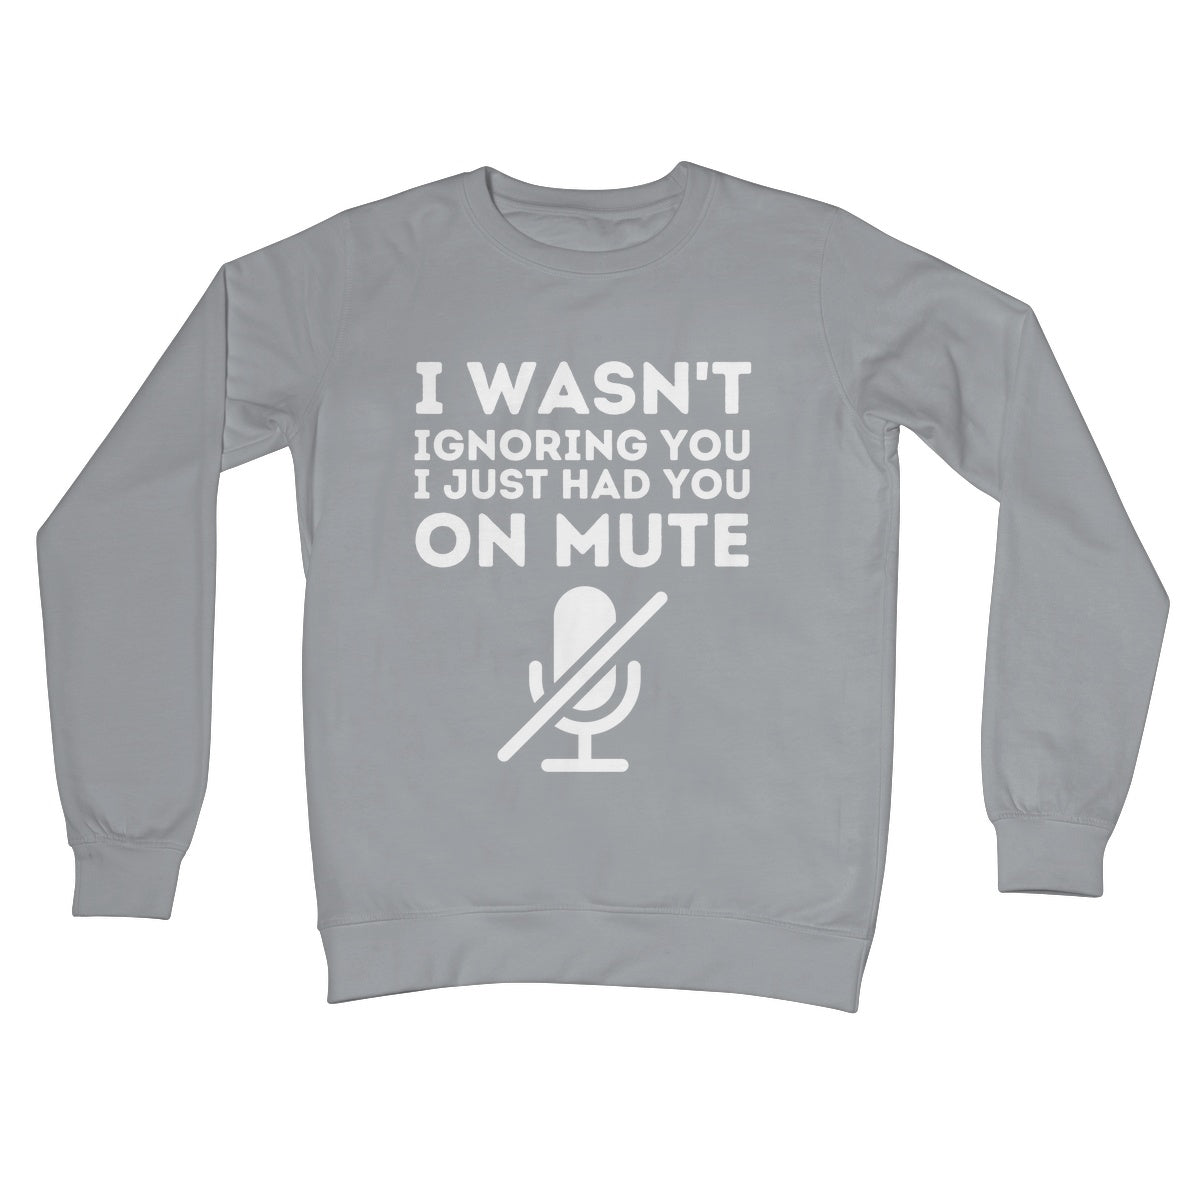 I just had you on mute jumper grey